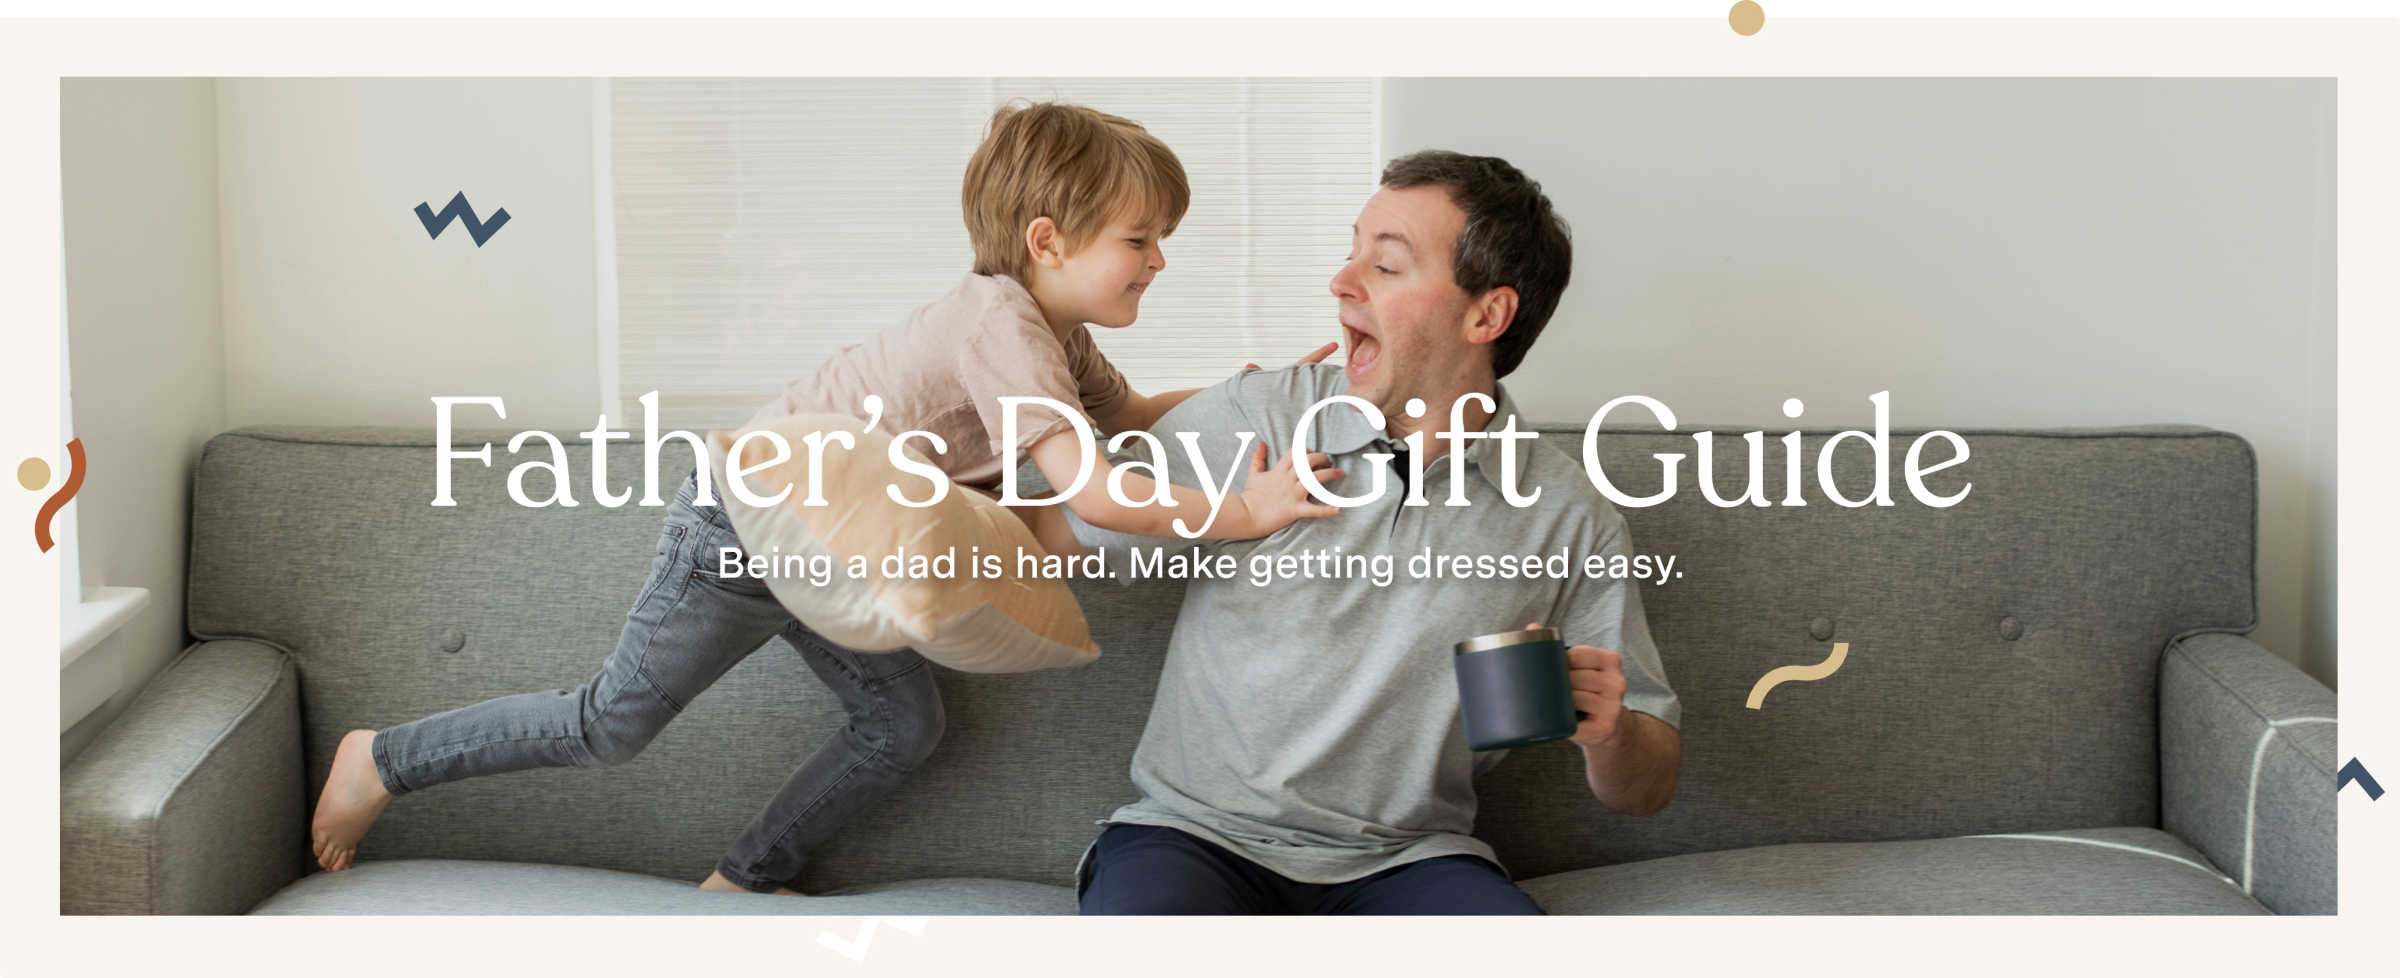 Father's Day Gift Guide Banner 